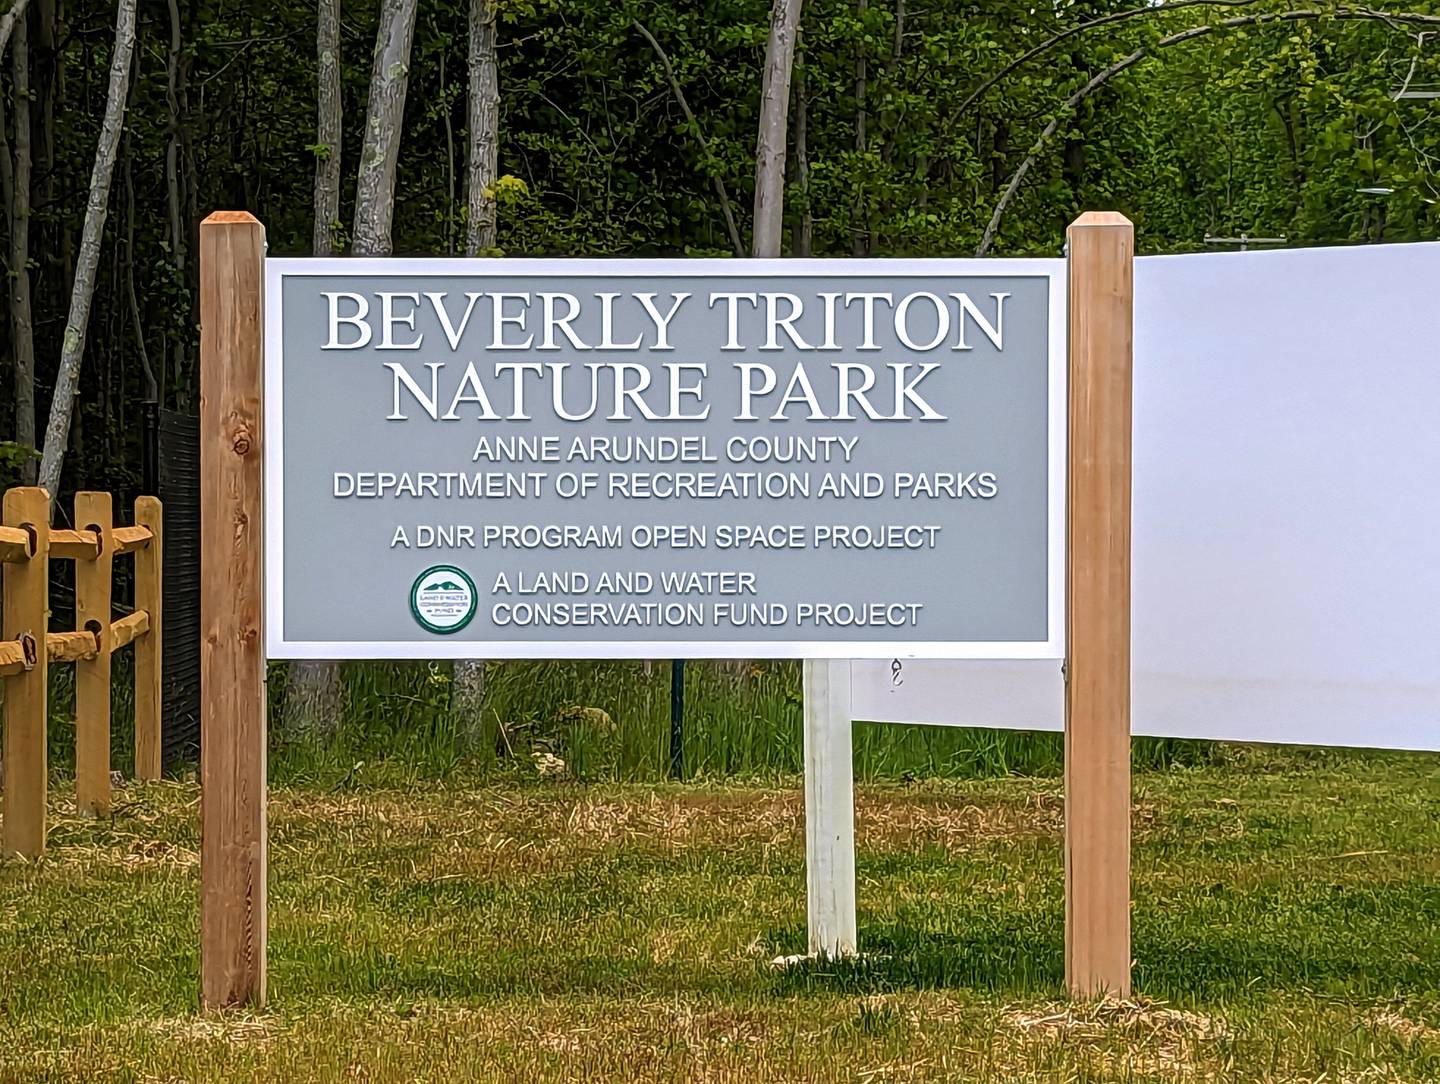 Beverly Triton Nature Park opened Friday, May 5, three decades after Anne Arundel County bought the one-time racist resort on the Chesapeake Bay to keep it from be developed for homes.